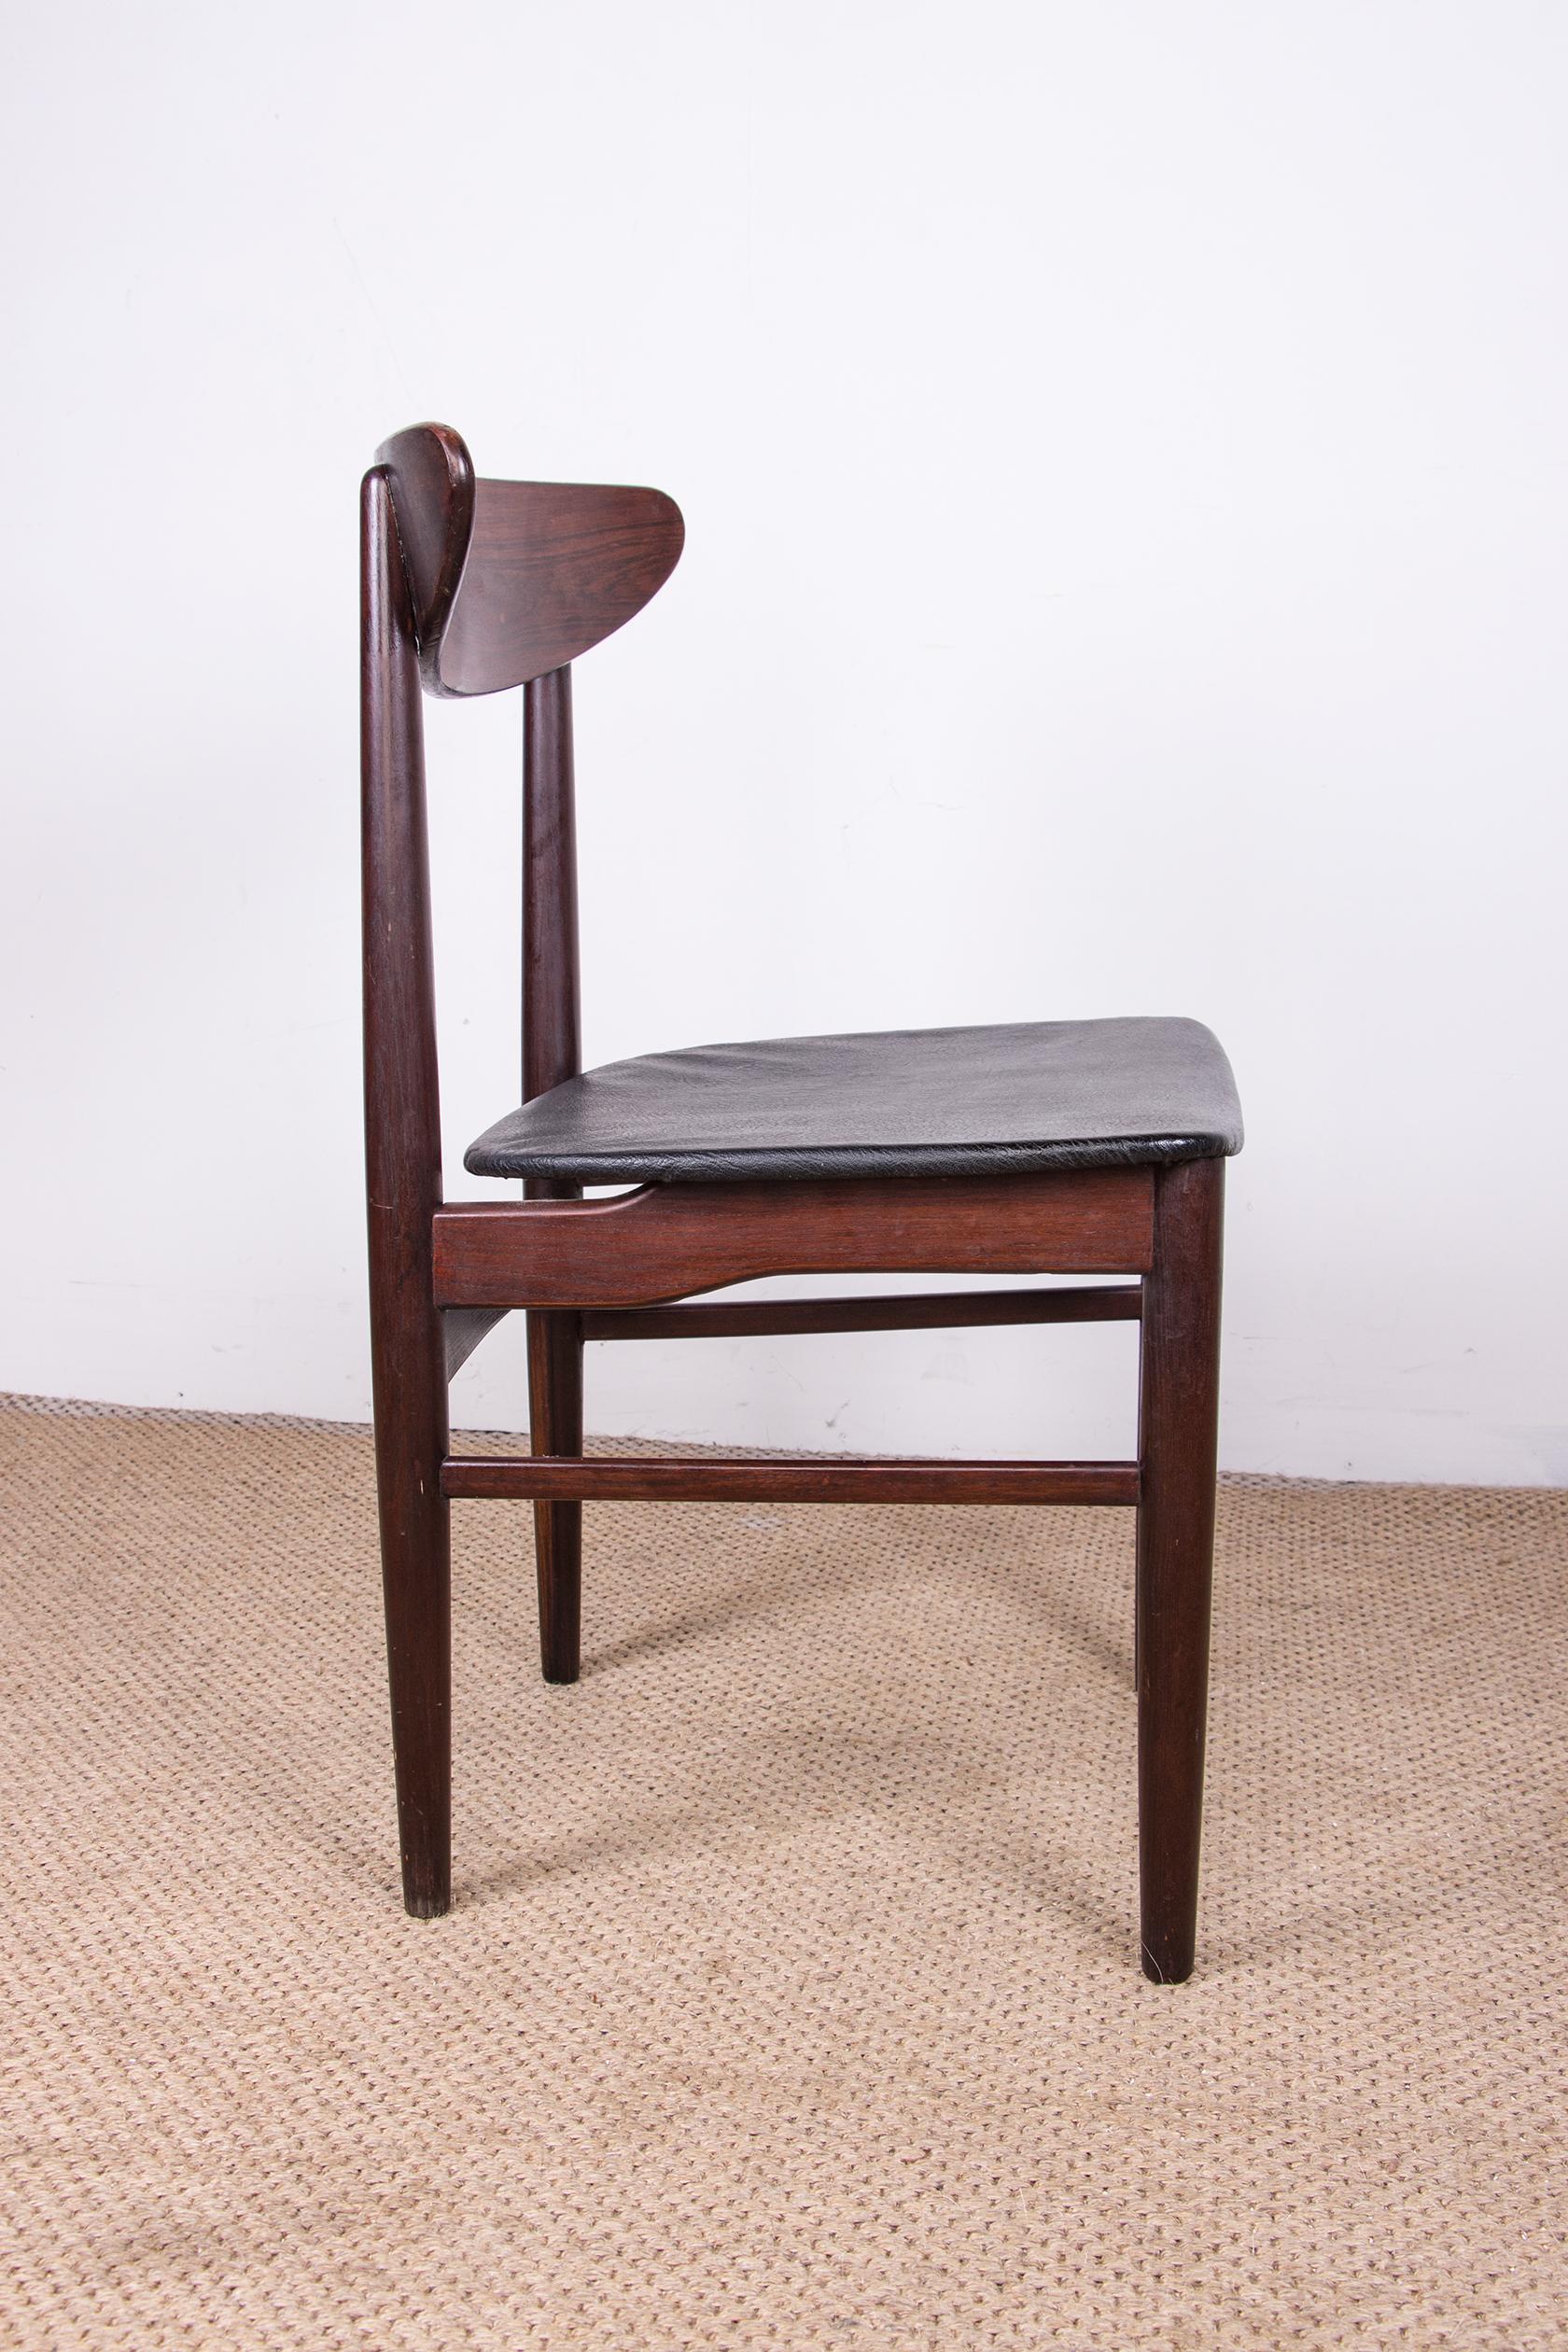 Mid-20th Century Pair of Danish Chairs in Rosewood and Skai by Dyrlund, 1960